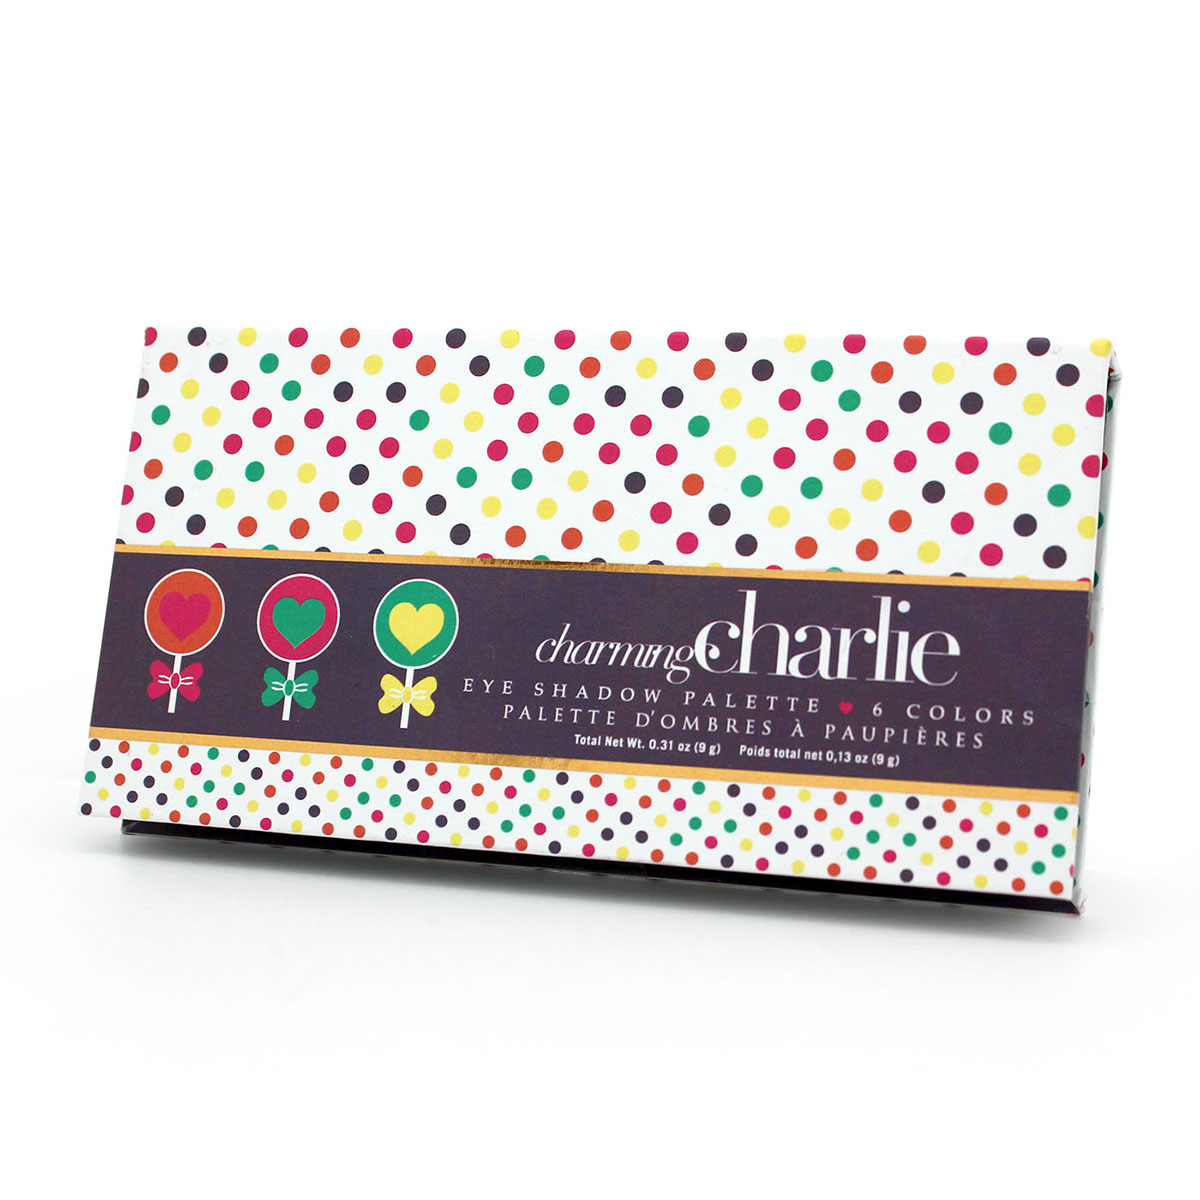 Charming charlie cosmetics packaging Eye Shadow Palette Moroccan Muse nautical Candy Coated beauty Make Up